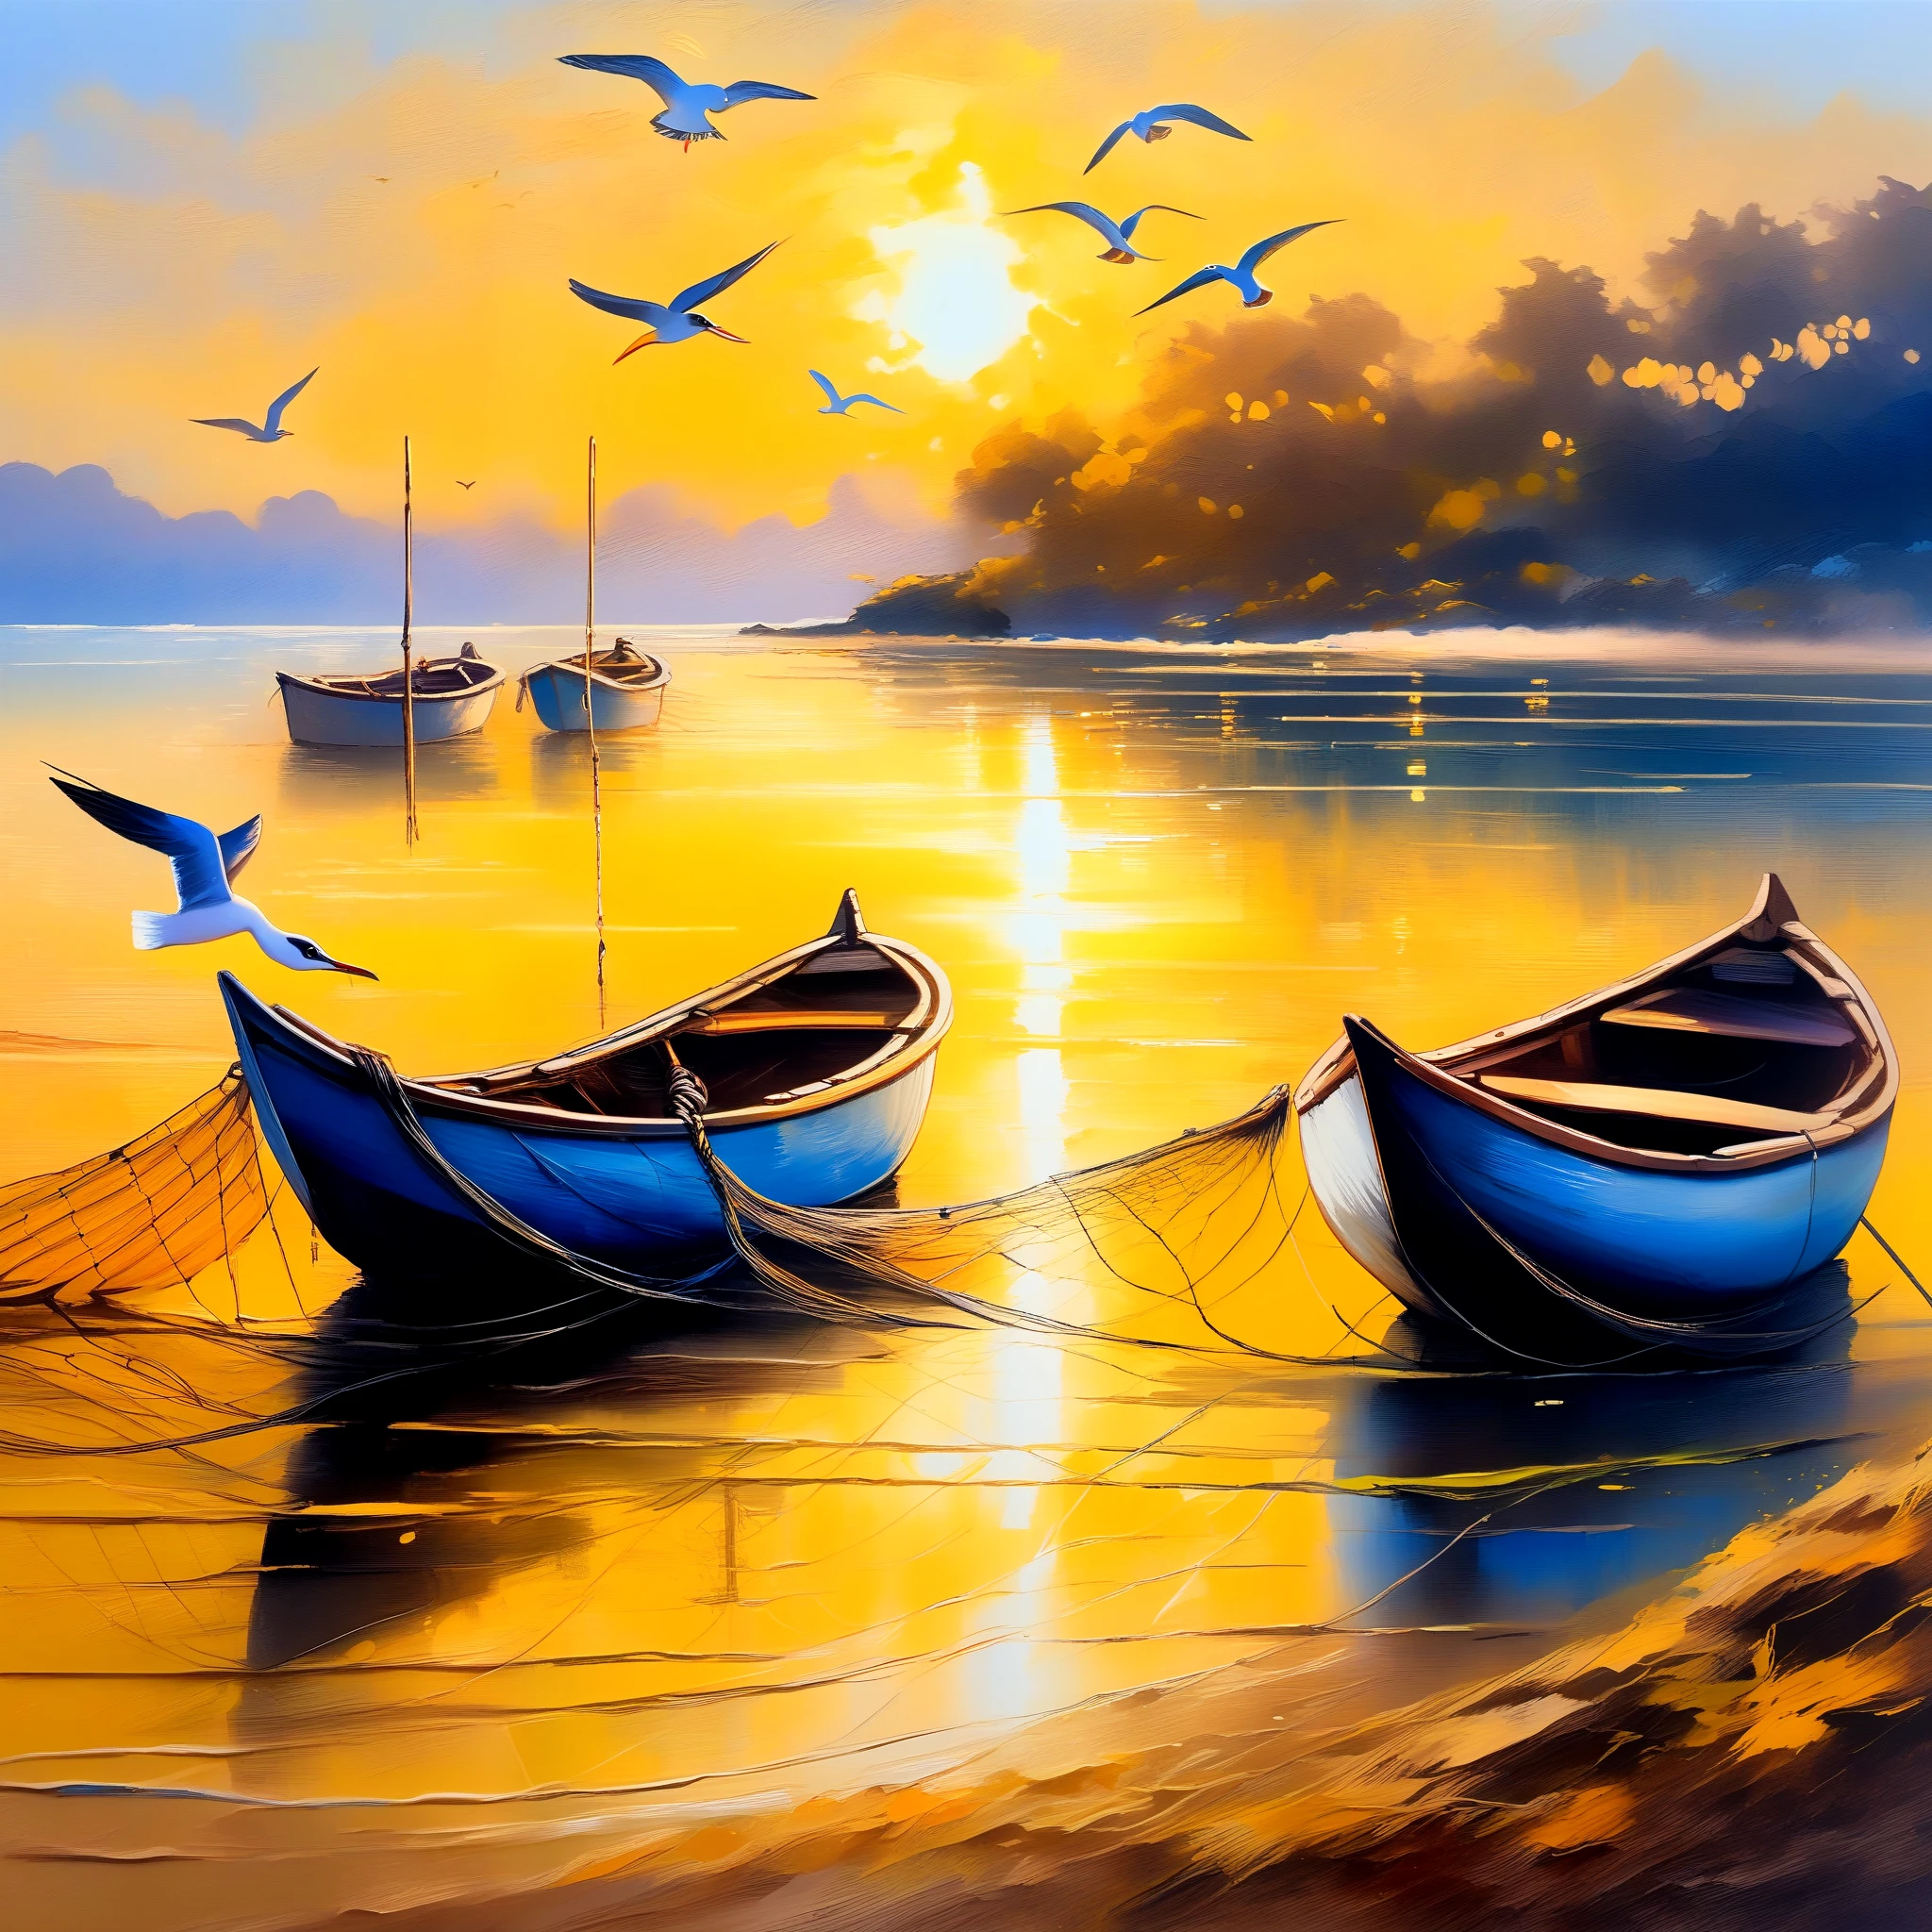 (8k, best quality, masterpiece: 1.2), (best quality: 1.0), (ultra highres: 1.0), (oil painting, impressionism style), anchored fishing boats, (fishermen from the Brazil throwing and collecting nets with fish), reflection of the canoes in the calm and gentle river, (small waves on the edge of the beach on the yellow sand), sunset, beautiful sun reflecting on the river, 3 seagulls flying around the nets, (art bucolic, detailed painting, epic painting, full of colors and rich details), (extremely luminous and bright detailed painting drawing), (ink: 1.3), autumn lights